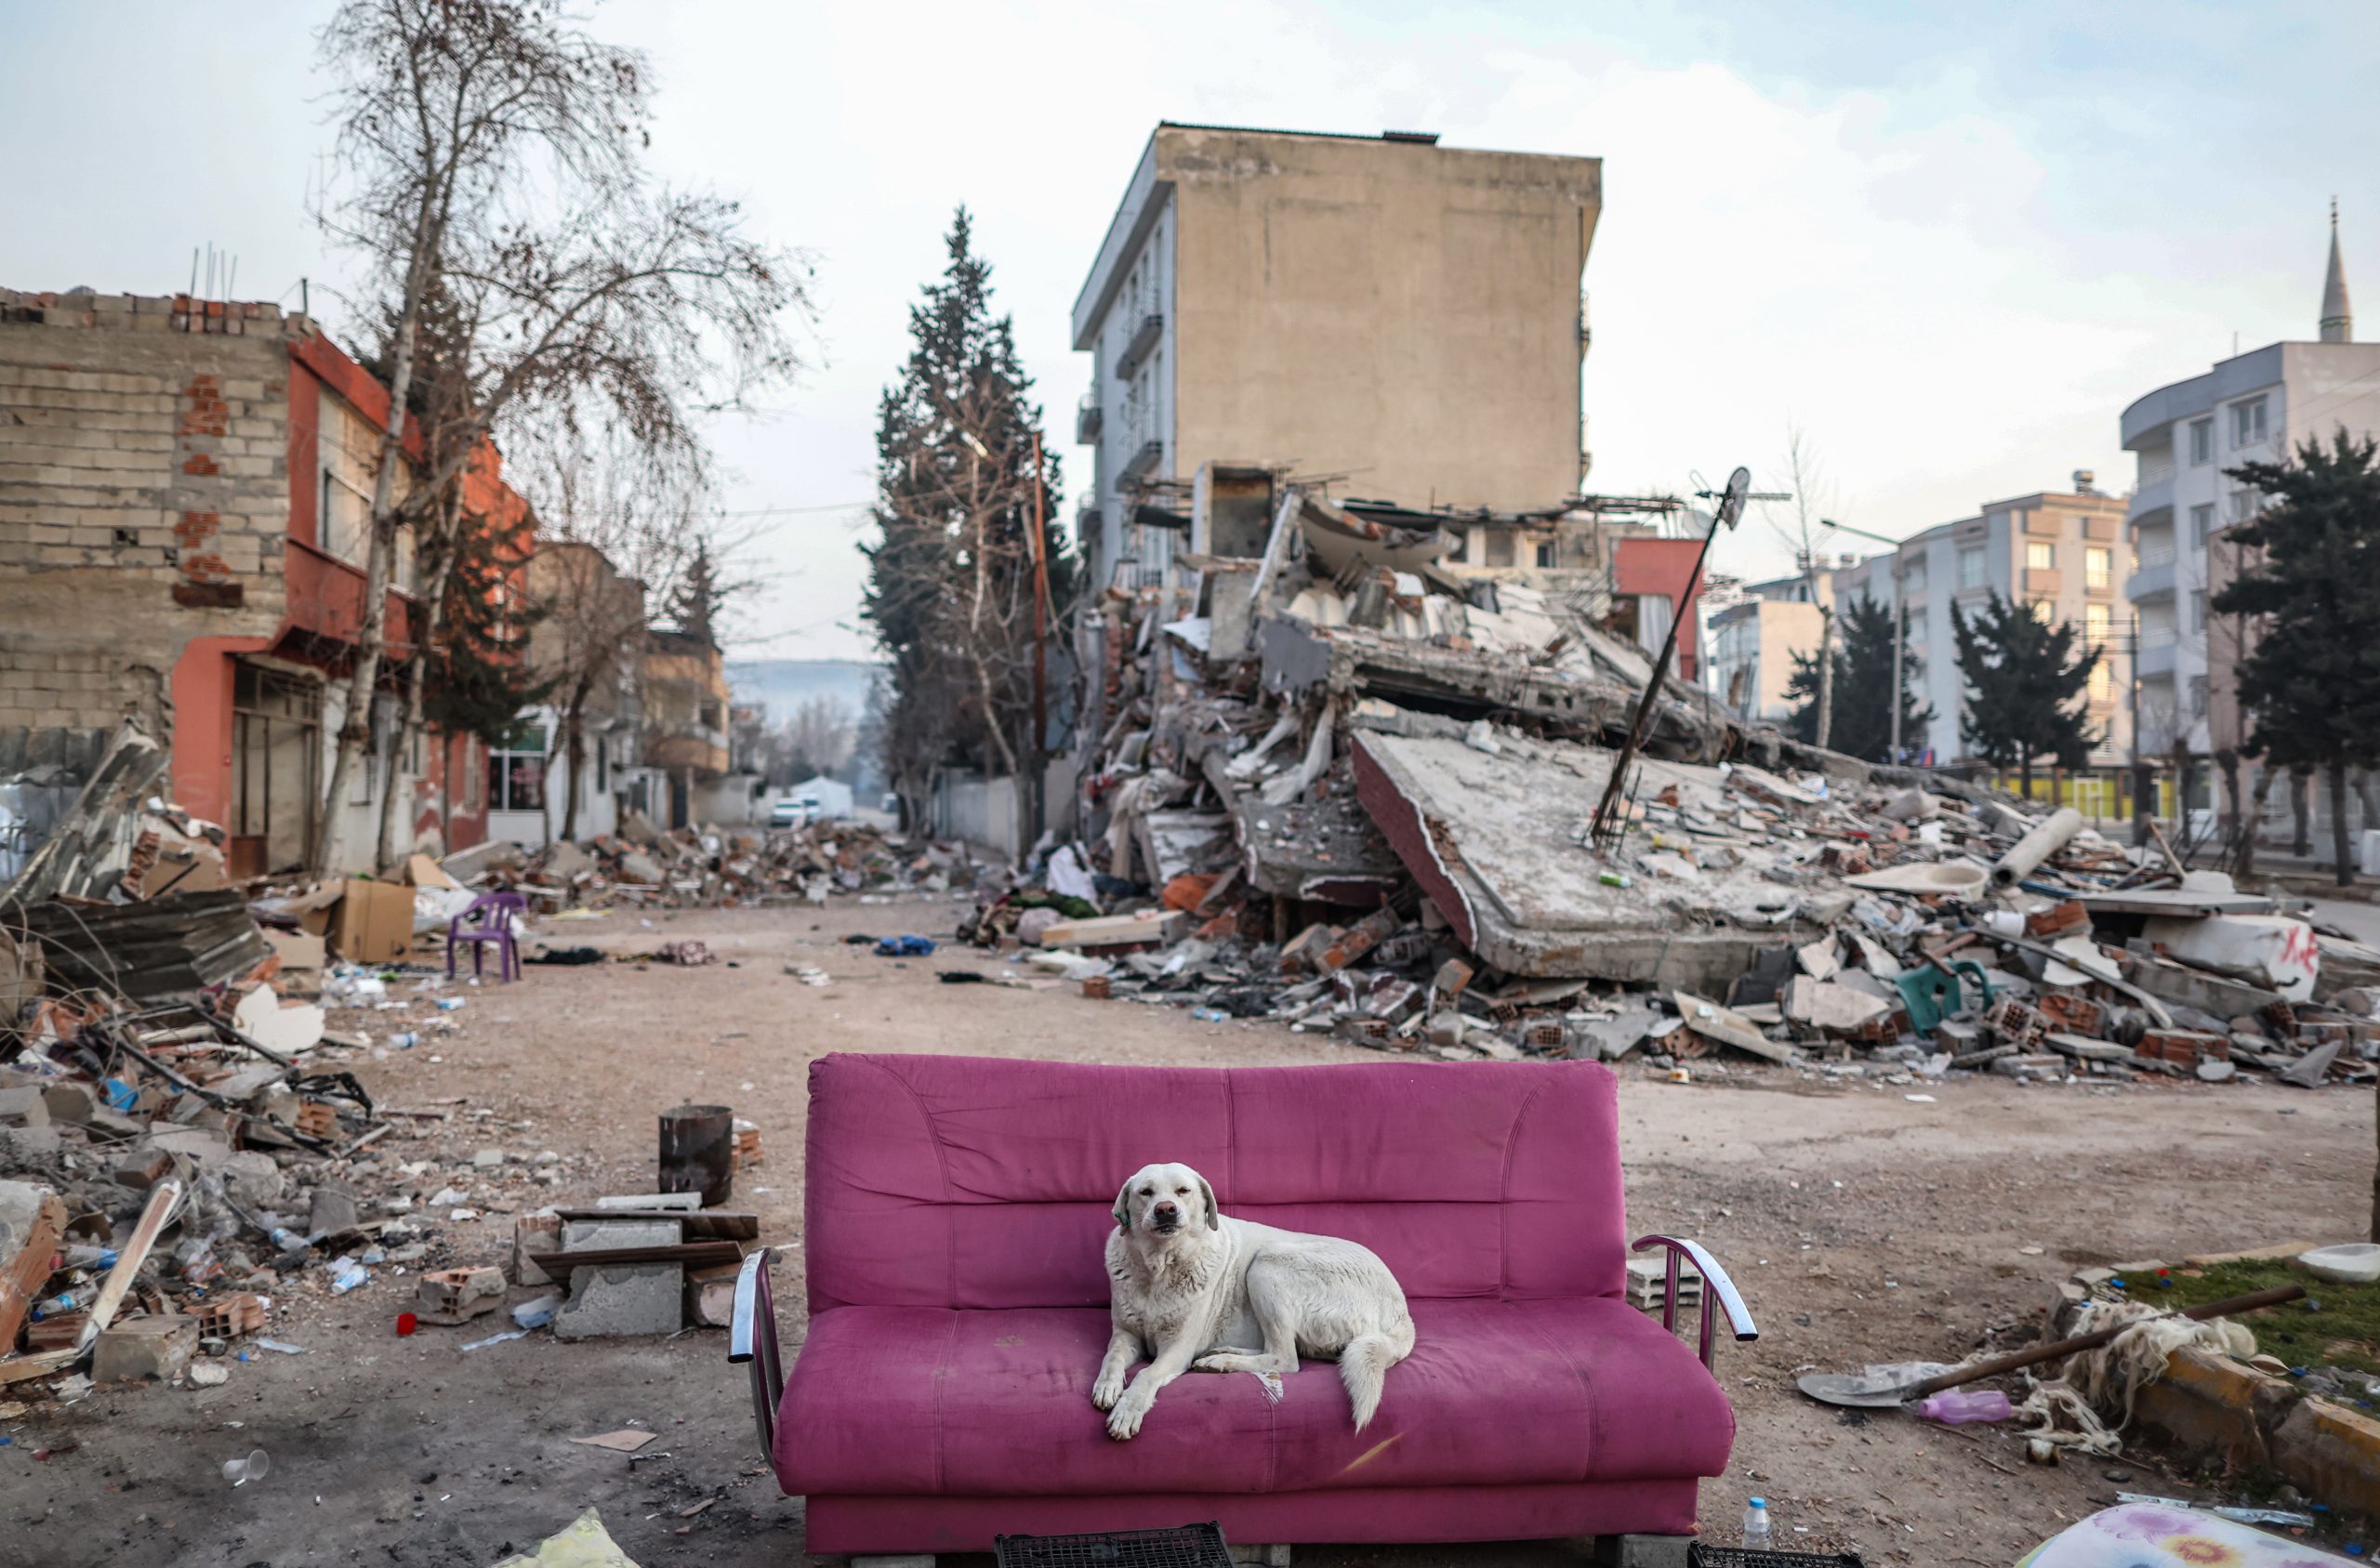 epa10476676 A dog sits on a couch in front of a collepsed building after powerful earthquake in Adiyaman, Turkey, 19 February 2023. More than 45,000 people have died and thousands more are injured after two major earthquakes struck southern Turkey and northern Syria on 06 February. Authorities fear the death toll will keep climbing as rescuers look for survivors across the region.  EPA/ERDEM SAHIN